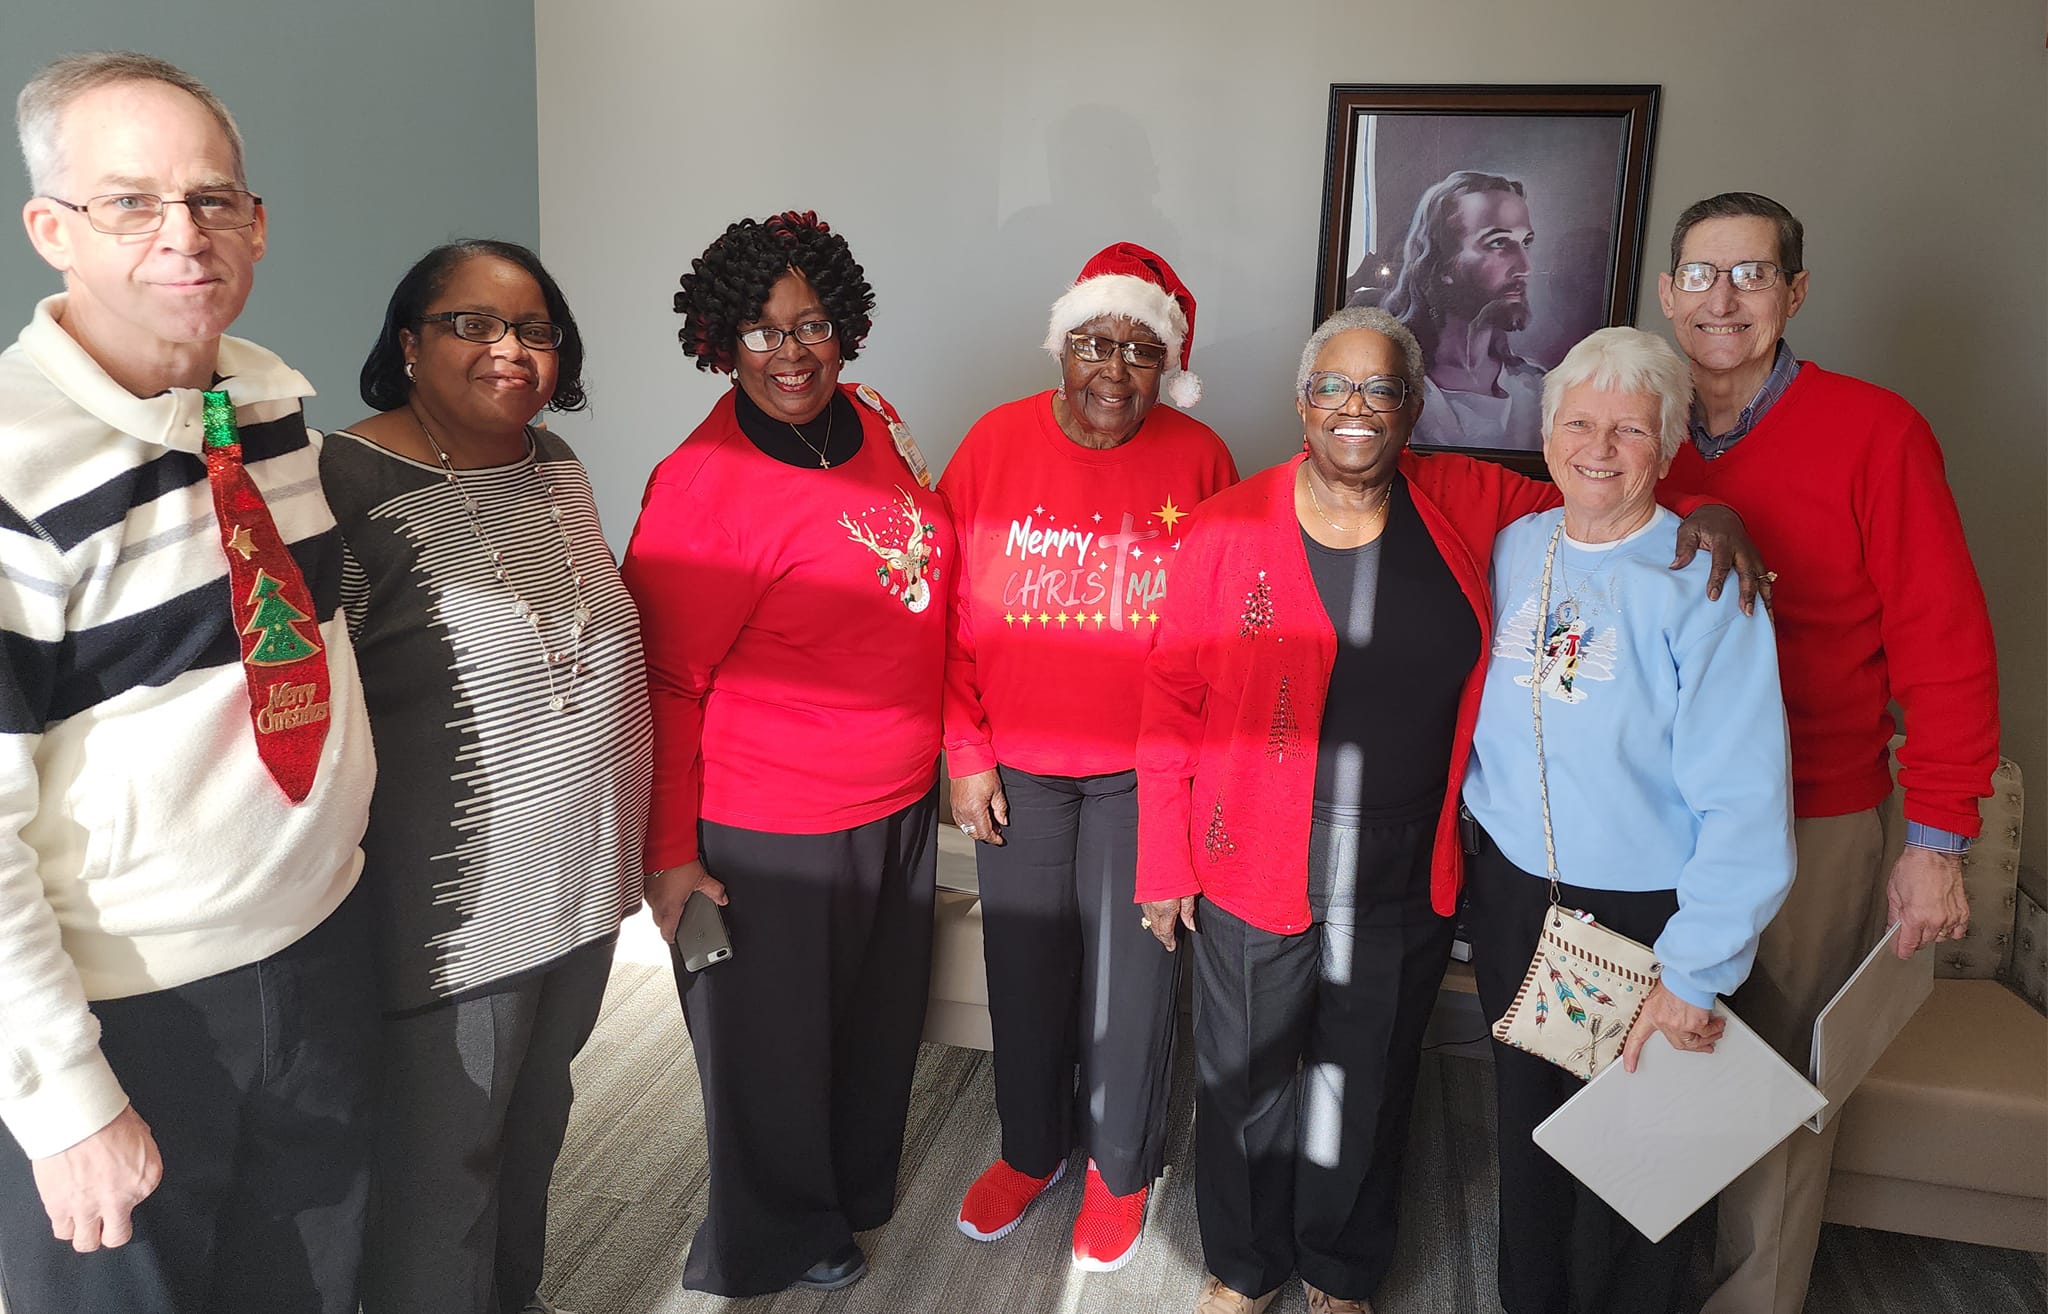 Len, Alfredia, Joanne, Miss Dot, Lorene, Susan, and Paul shared their voices and Christmas Cheer!